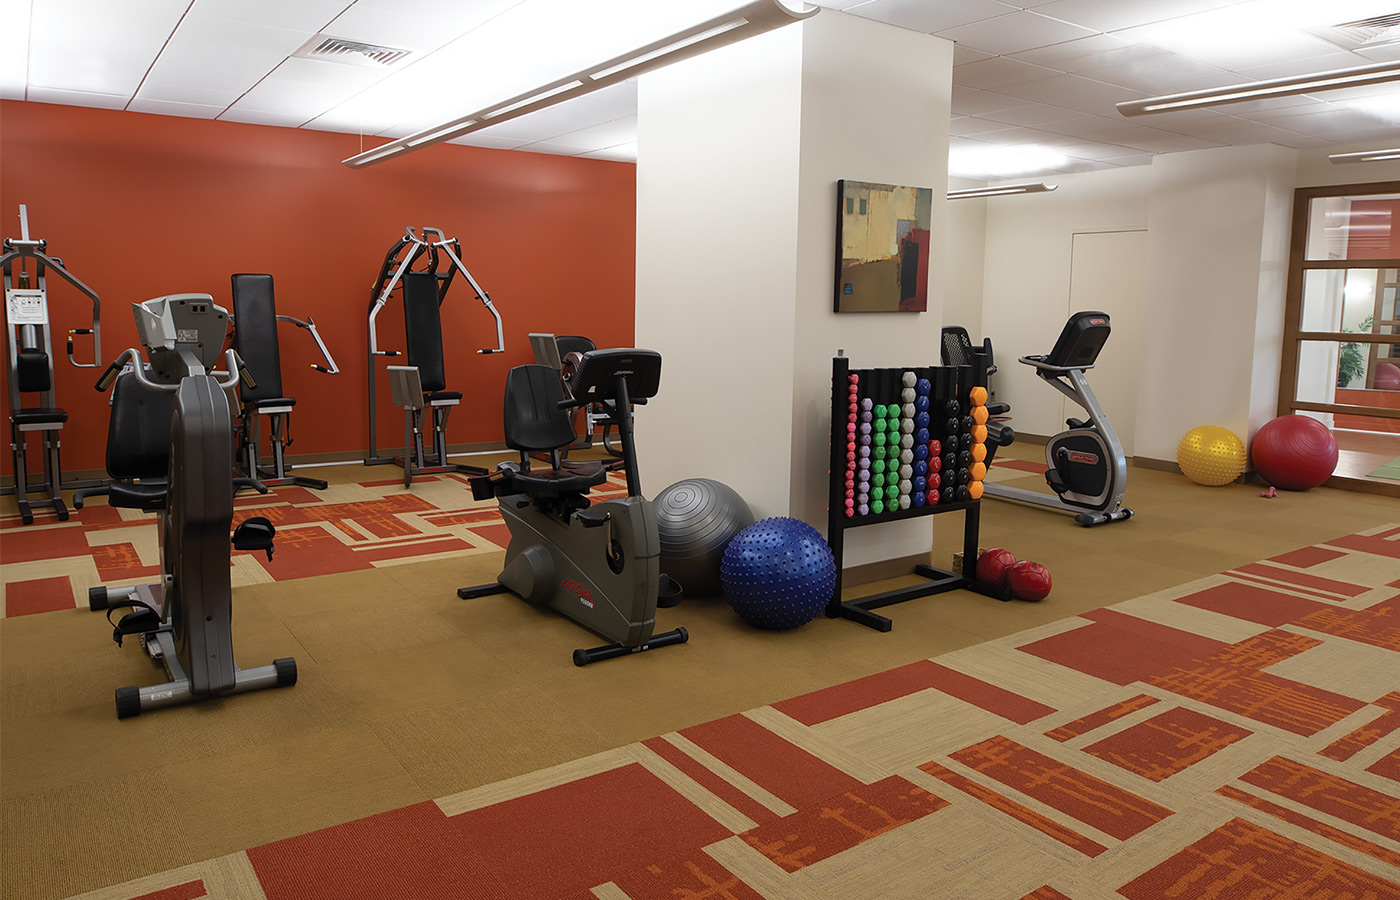 The gym at The Watermark at 3030 Park.